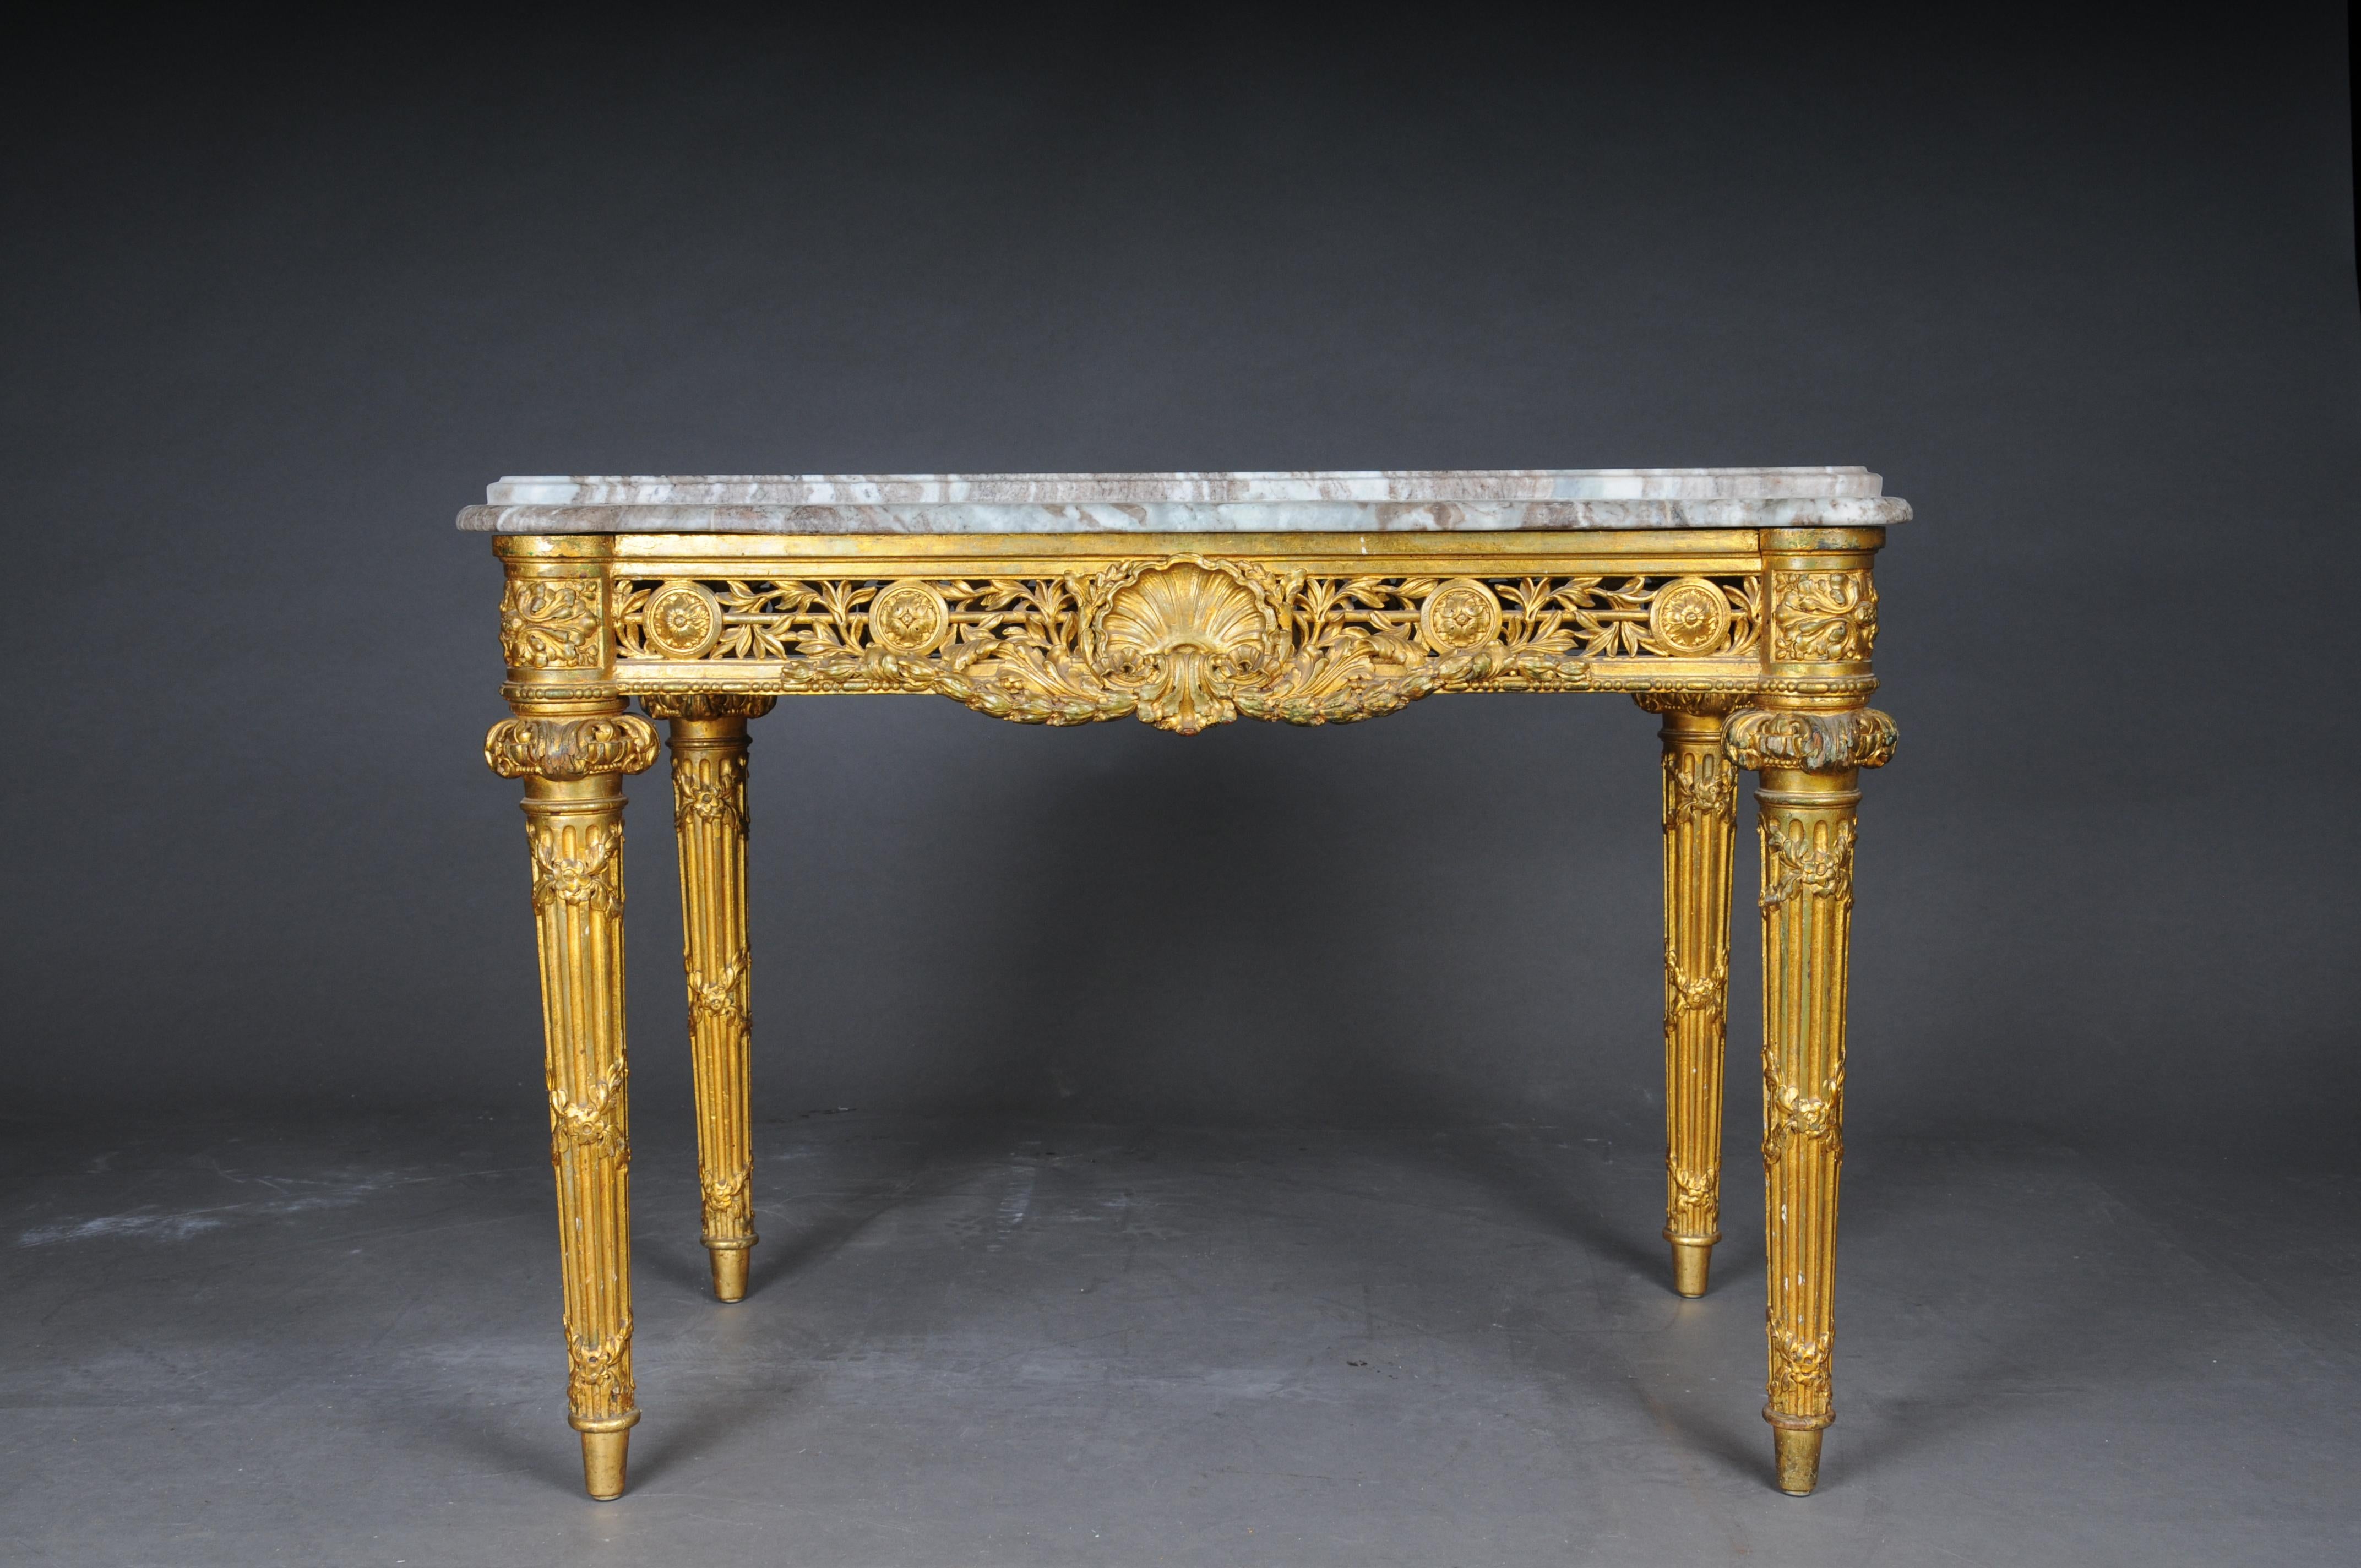 Museum antique coffee table/console table gilded with marble top around 1860, Paris, Louis XVI


Richly carved solid wood body with rich ornaments, finely carved in Louis XVI. Fluted and tapered high legs, richly carved and grooved. Openwork and